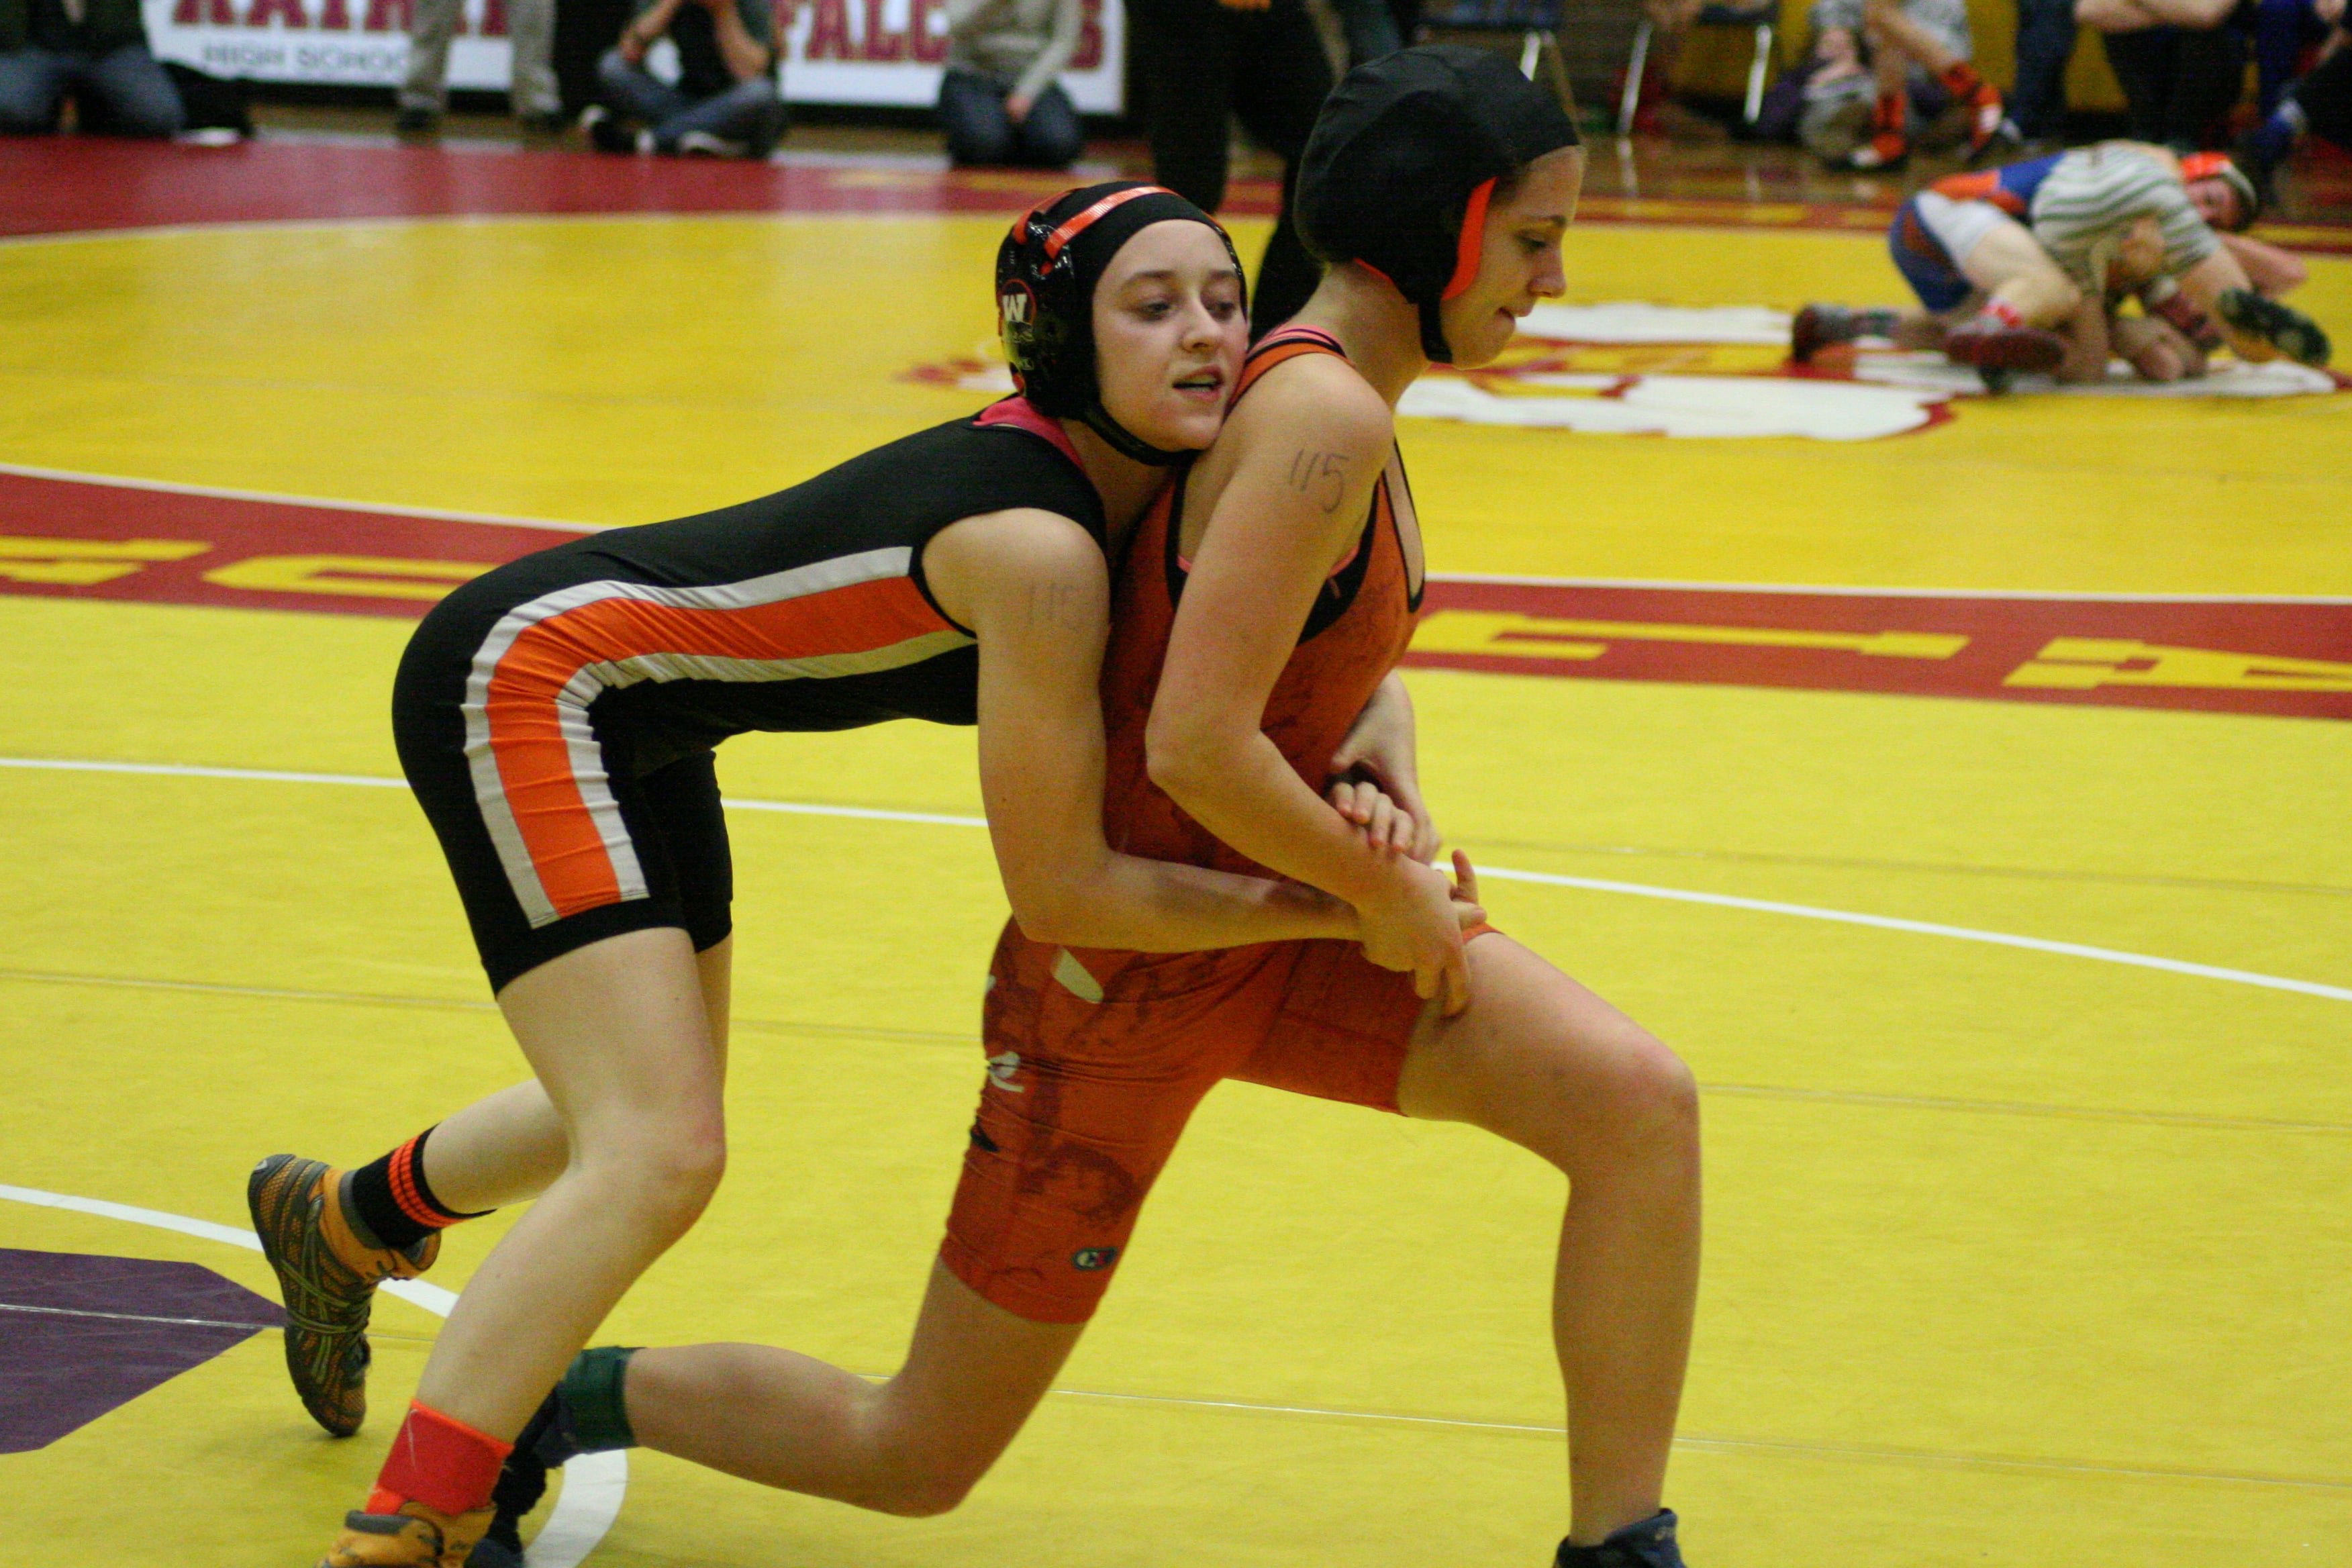 Washougal Panther Jessica Eakins loses her grip on this Kalama Panther in the 115-pound Clark County championship match. Eakins lost and settled for second place.